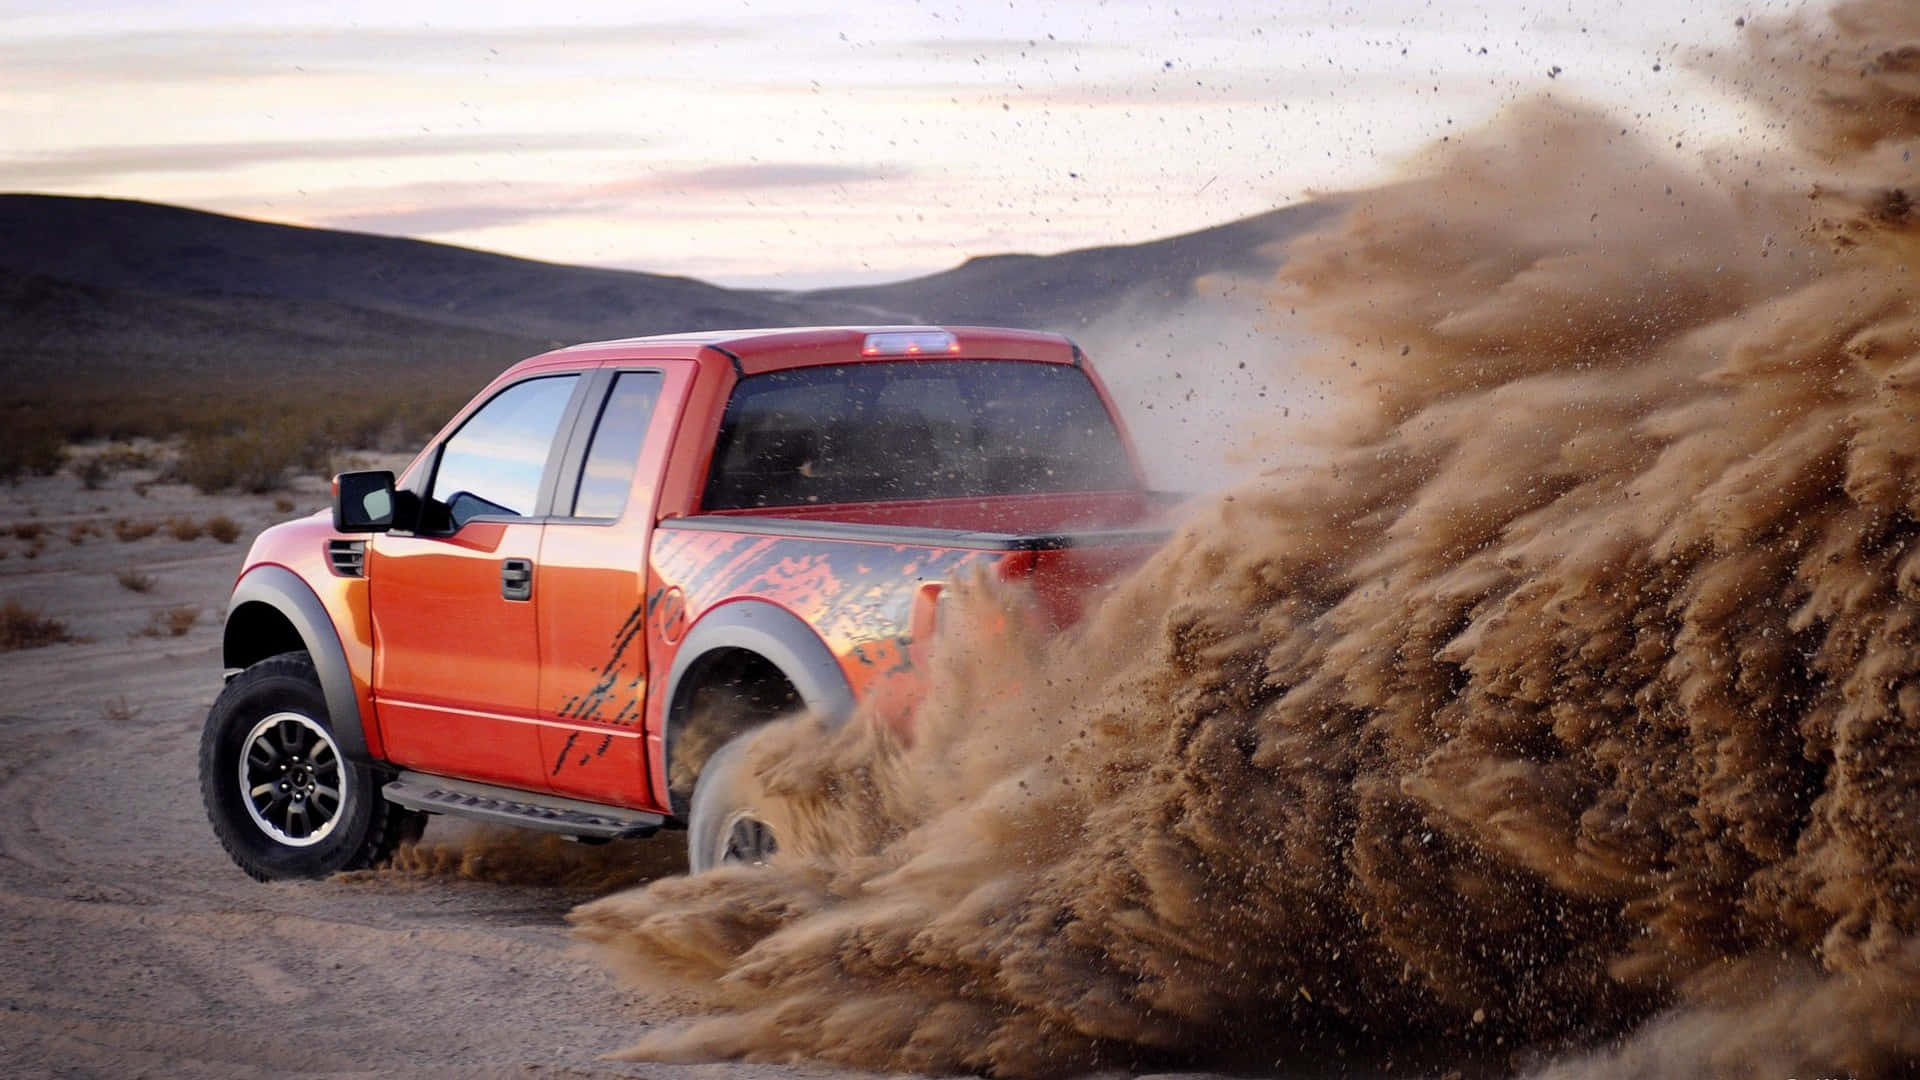 The Durable Ford F-150 Truck Wallpaper